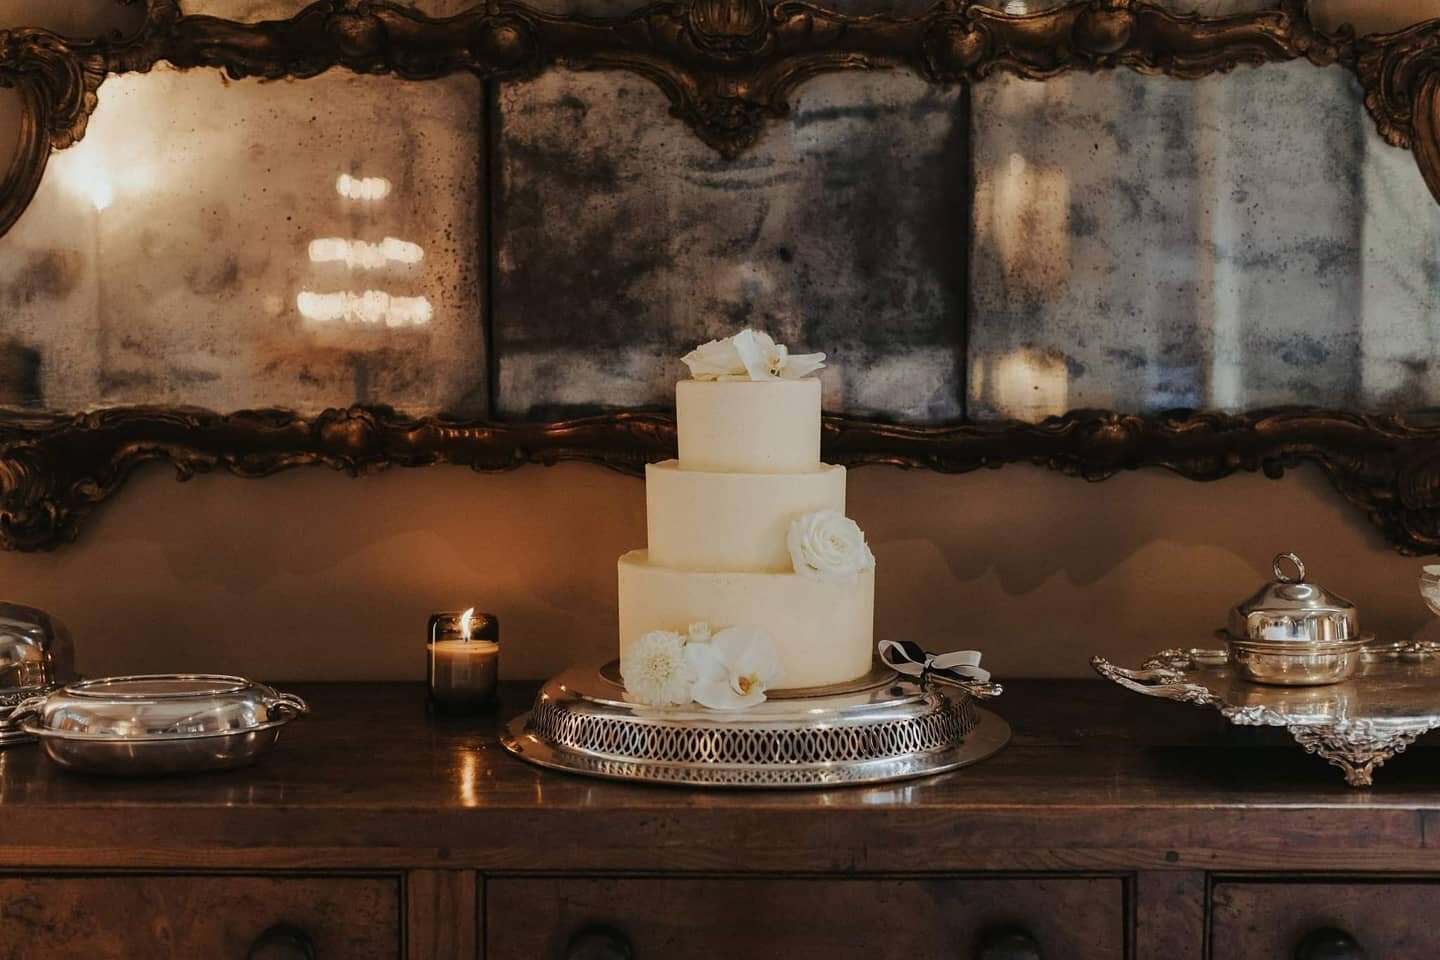 Jade and Matt's details from the incredible venue that is @mantells_ also look at that cake by @thecaker 😍 topped off with timeless florals by the always stunning @blush_flowers 

#mantellswedding #mantellsmteden #mantells #weddings #weddingcake #th